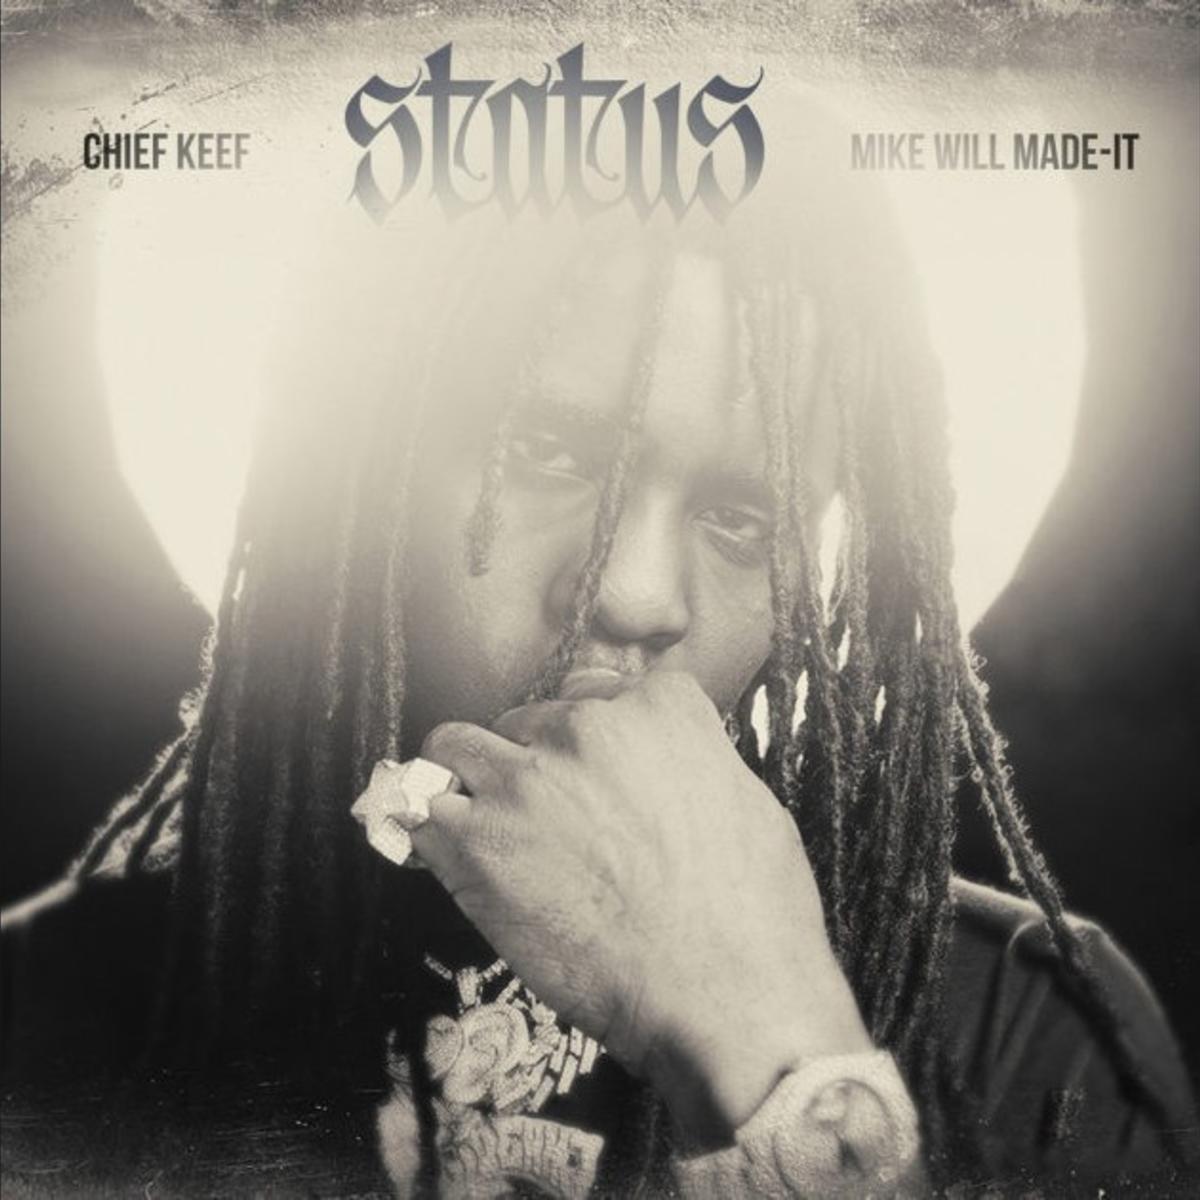 Chief Keef - Status Ft. Mike WiLL Made-It